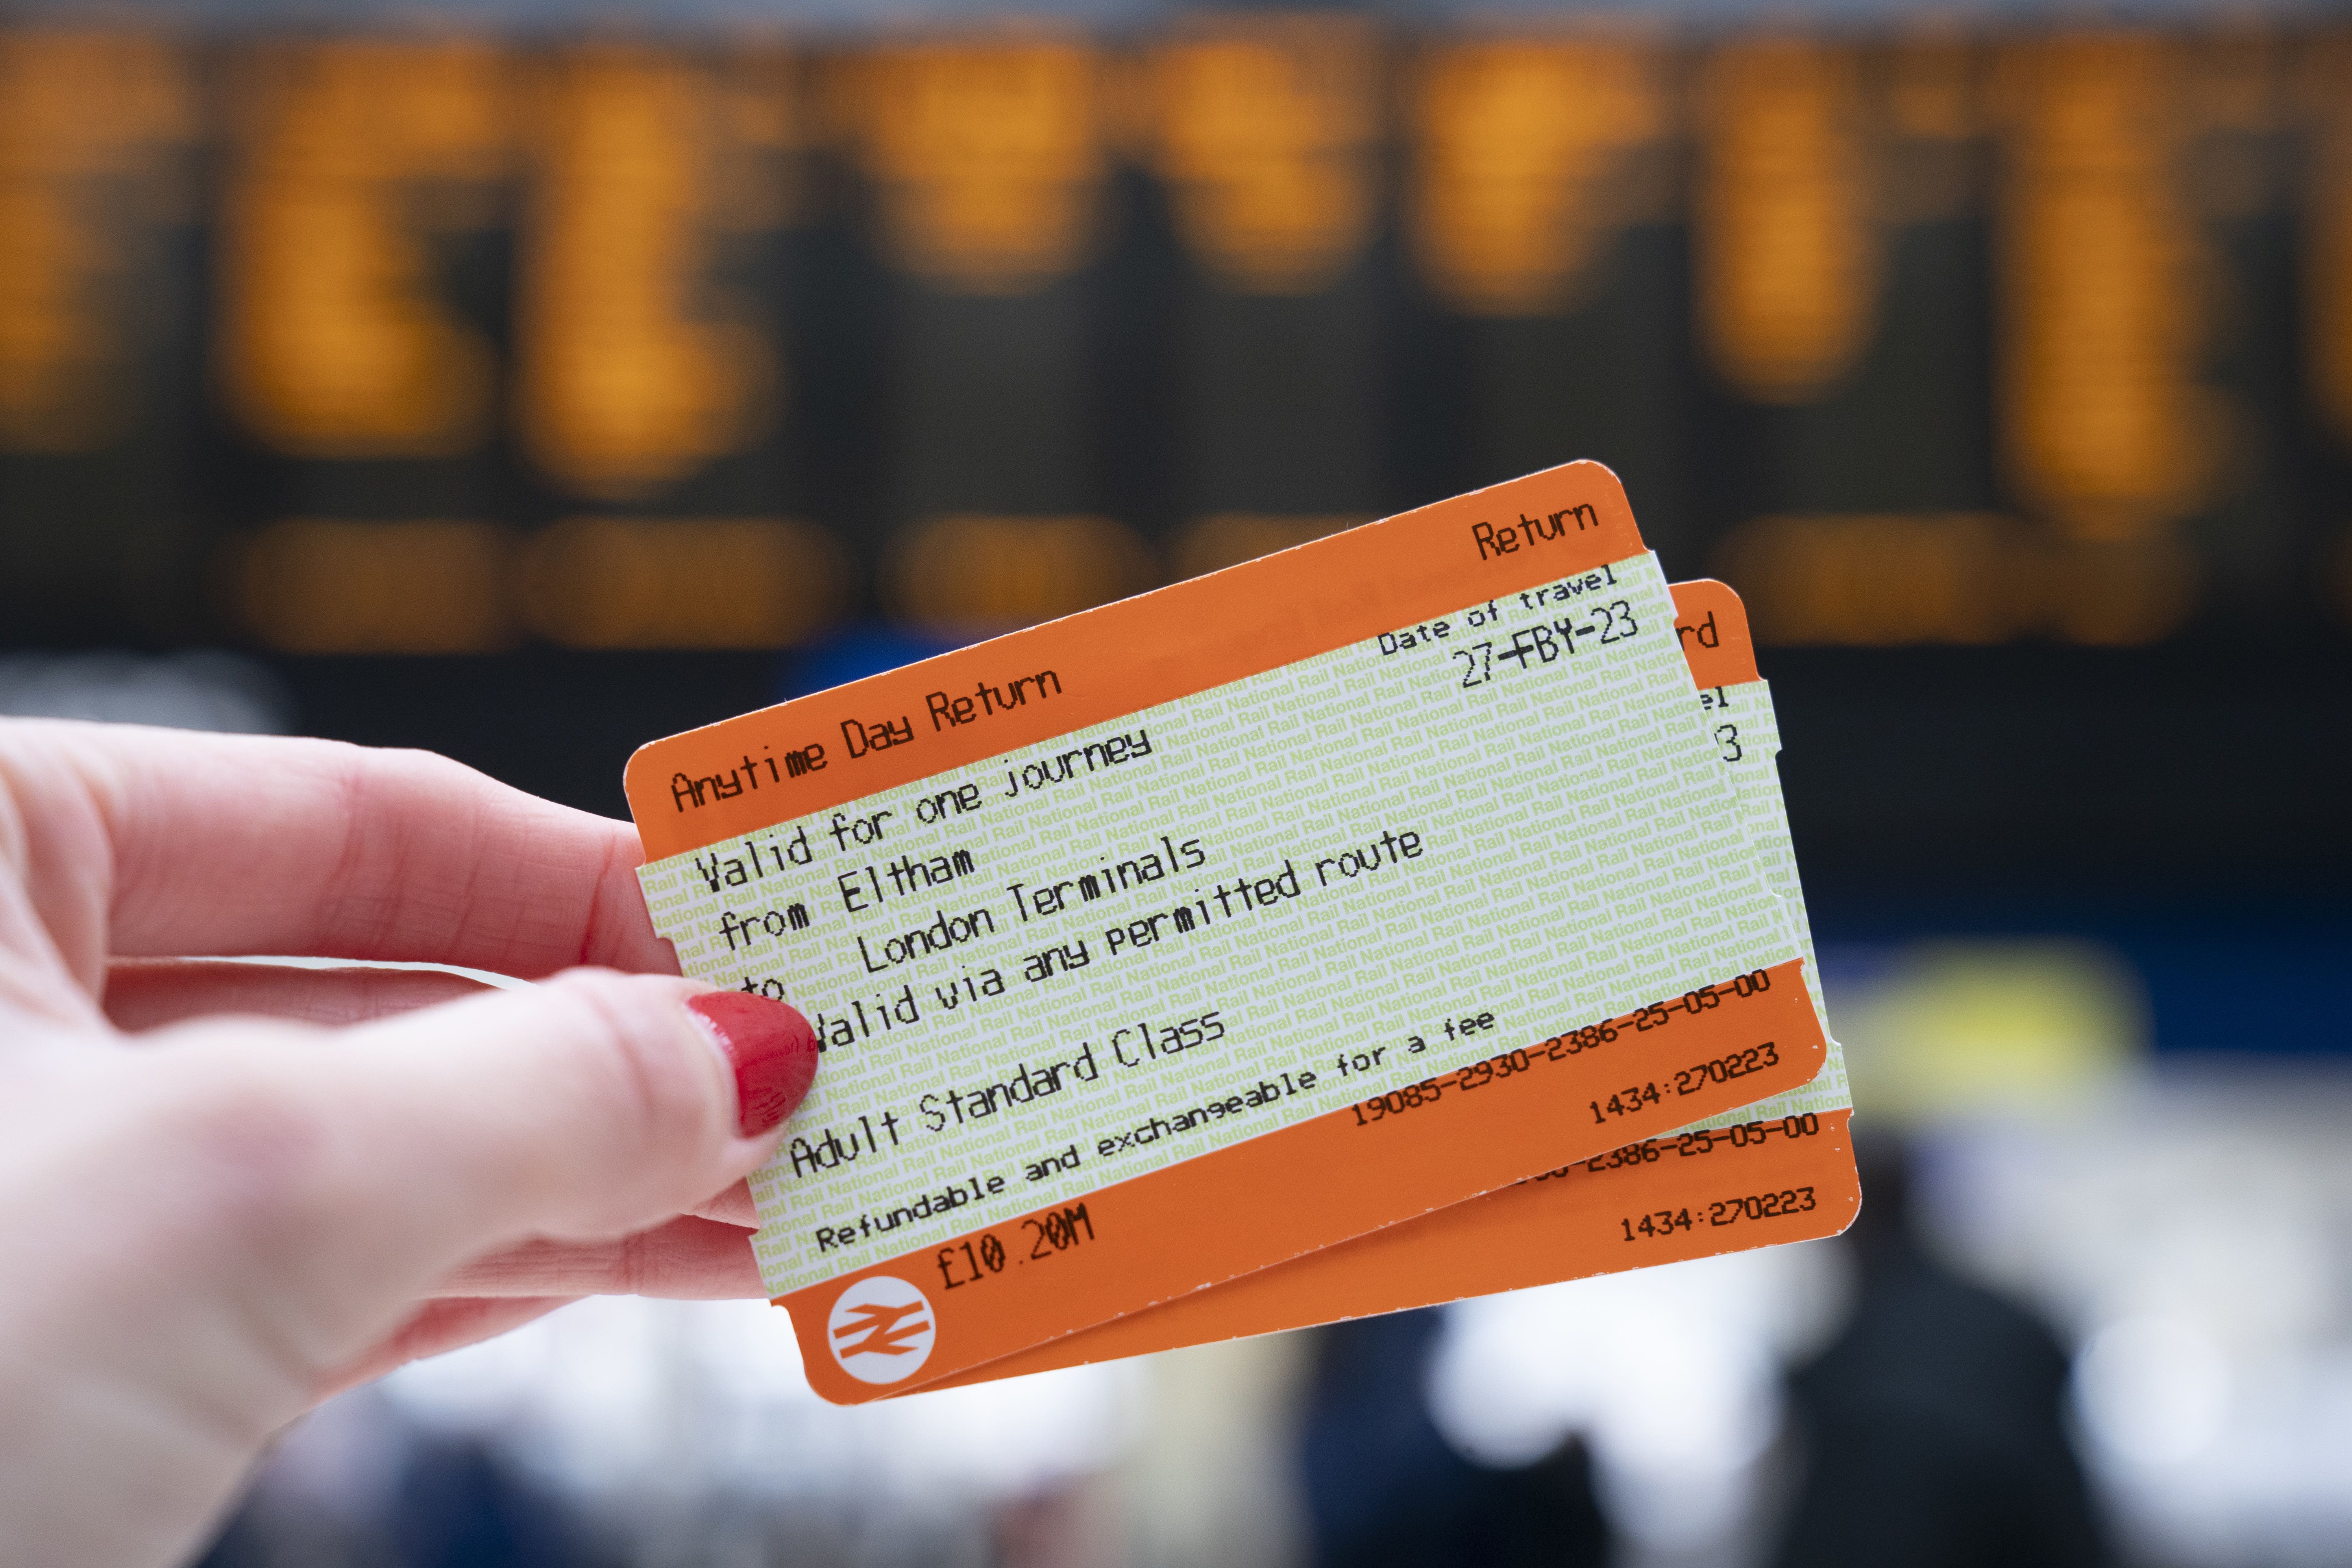 Regulated rail fares will increase by 4.9 per cent from 3 March next year